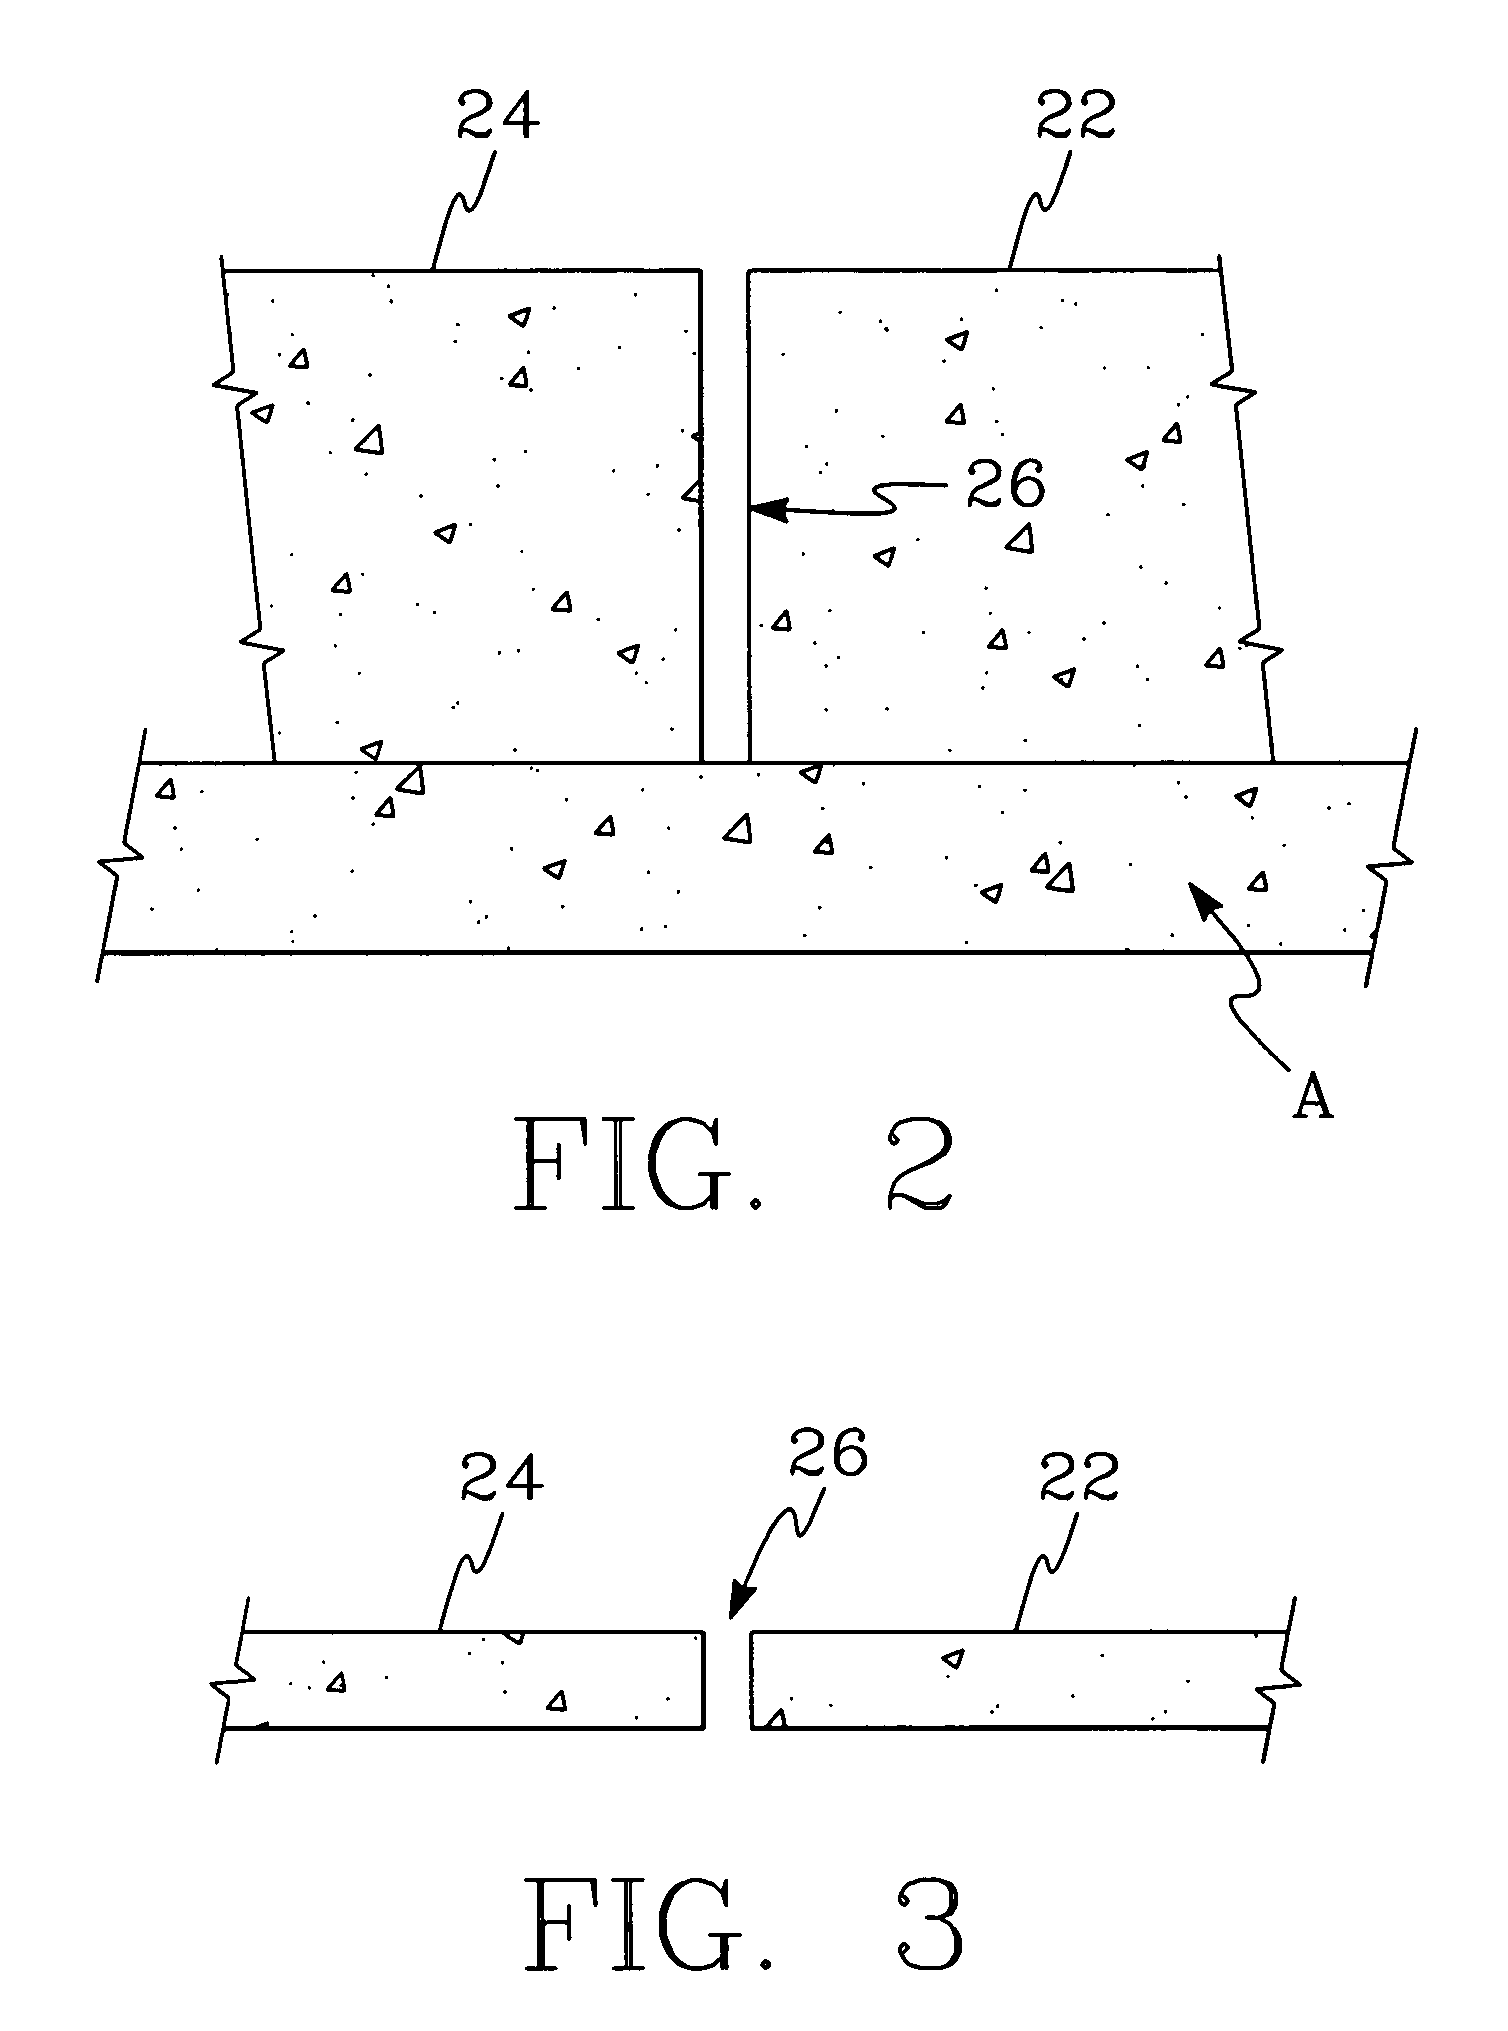 Flume for a filter system including at least one filter having a filter bed that is periodically washed with liquid, gas or a combination thereof